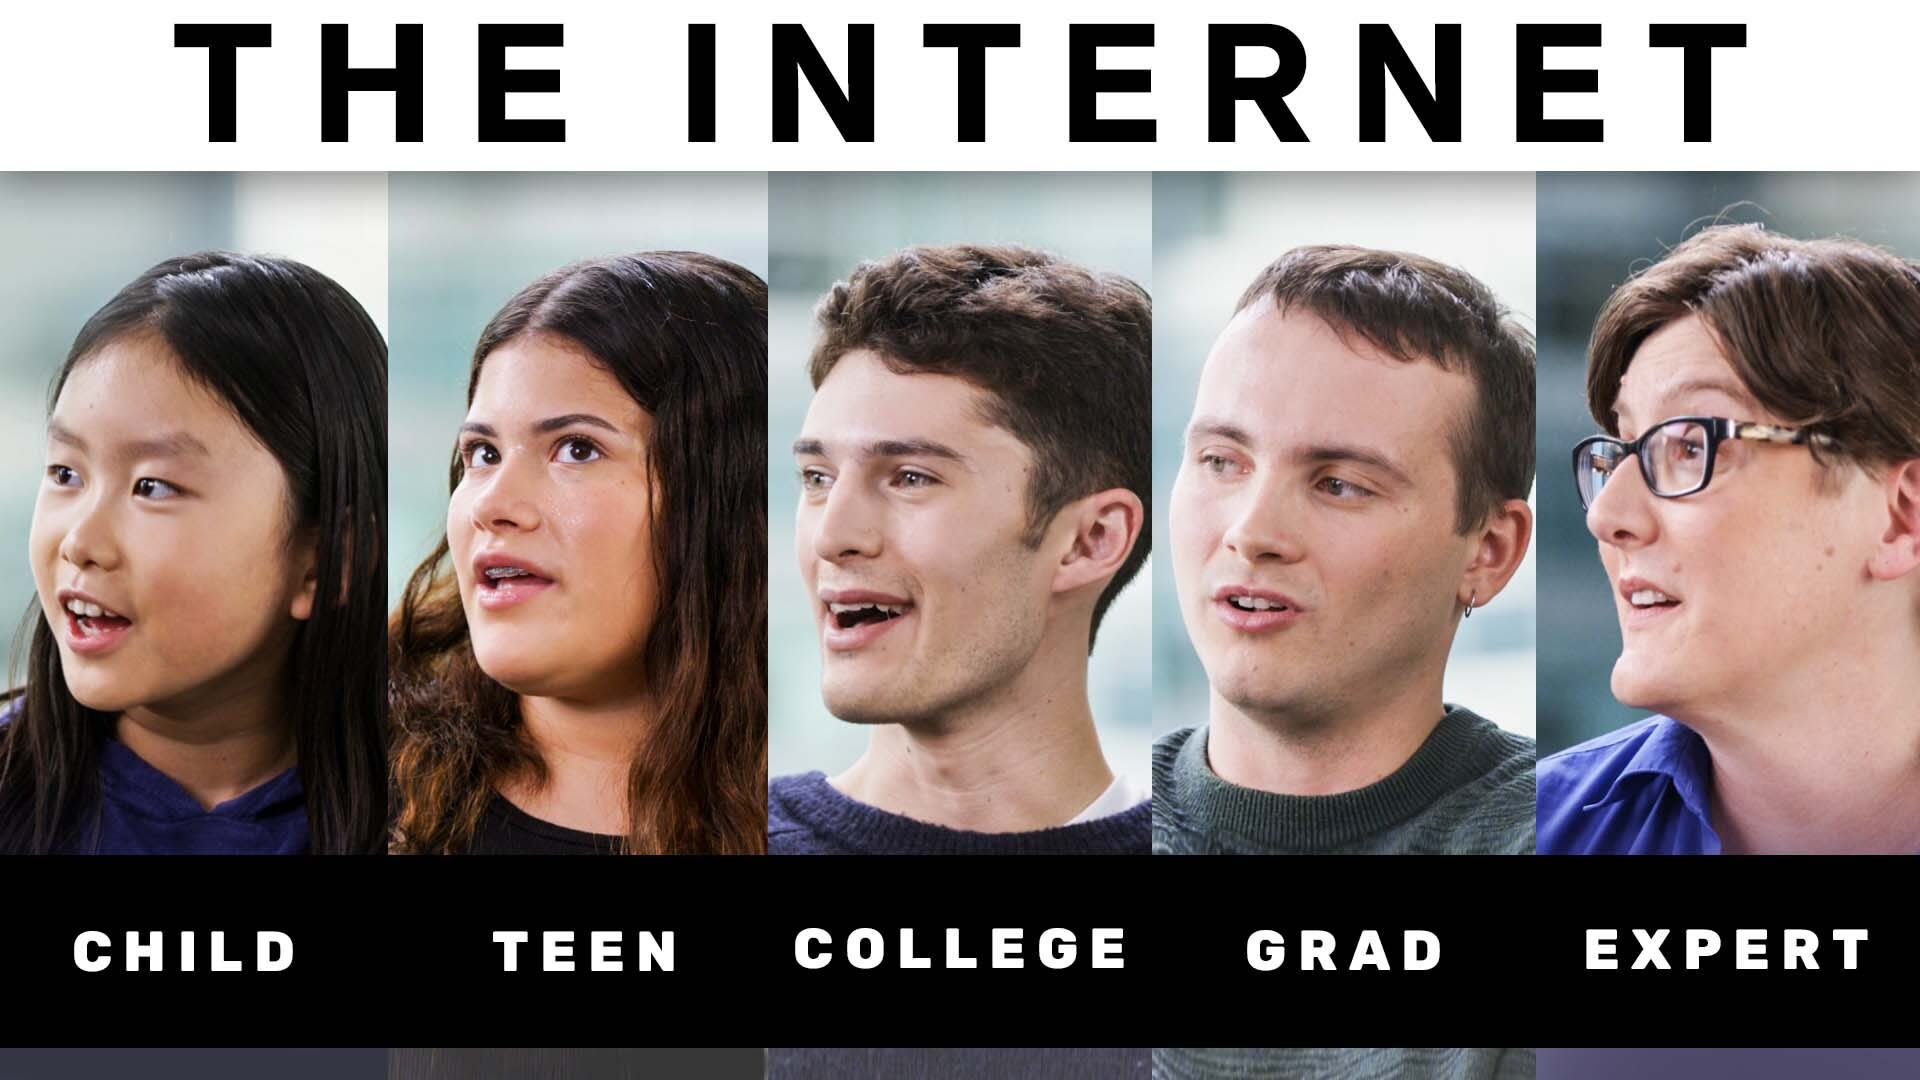 Watch UMass Professor Explains the Internet in 5 Levels of Difficulty | 5 Levels